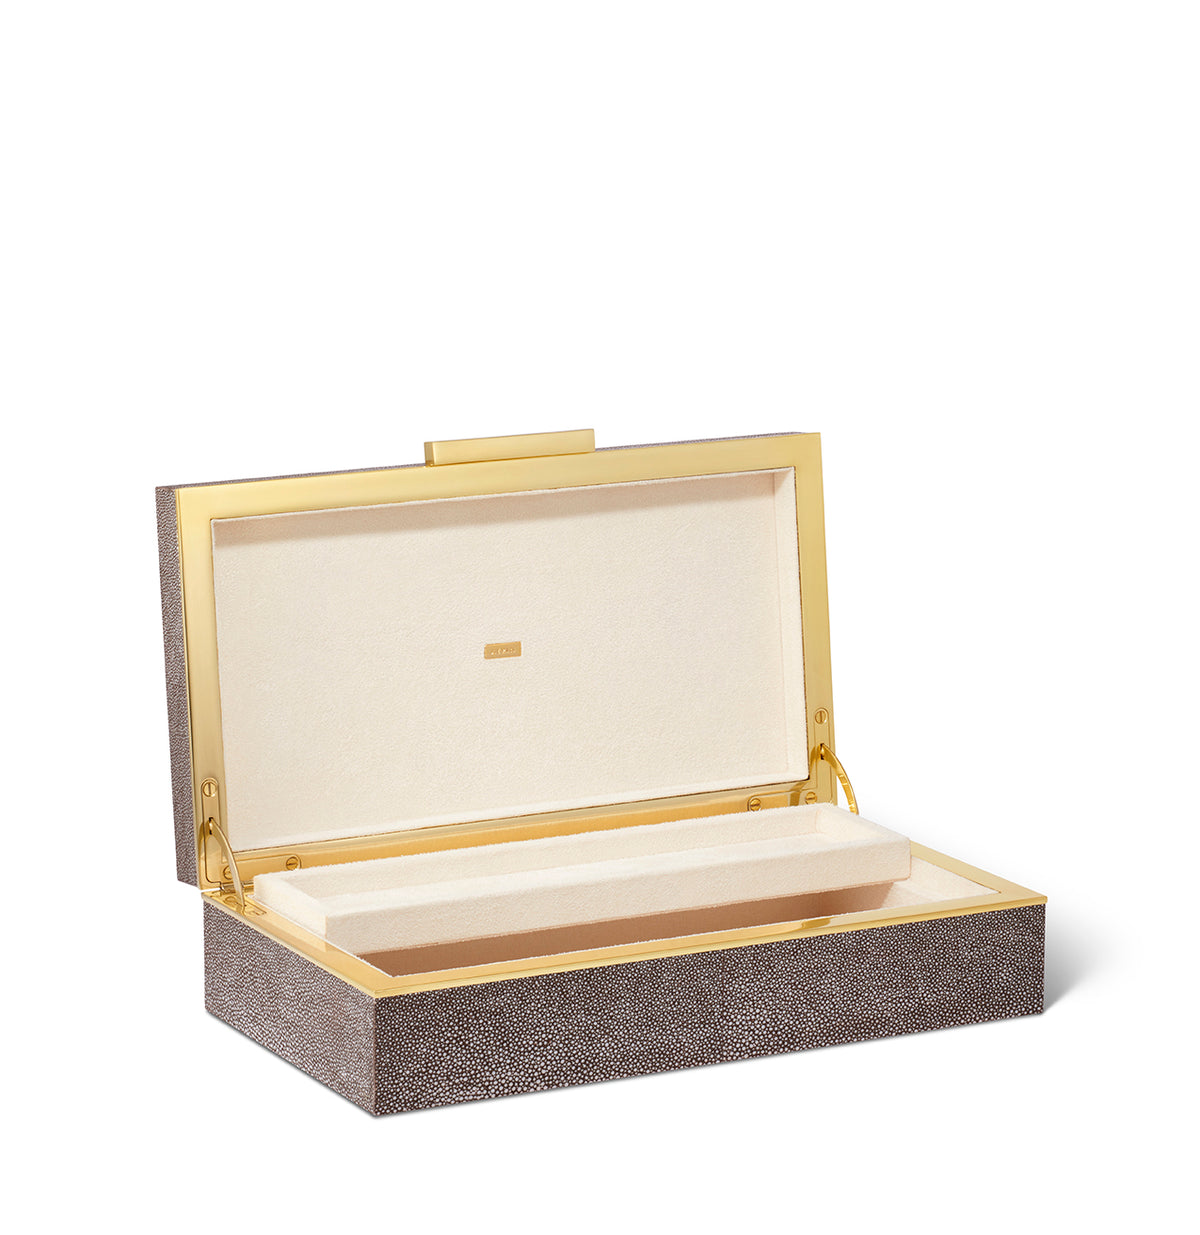 Aerin Shagreen Envelope Box on Over The Moon